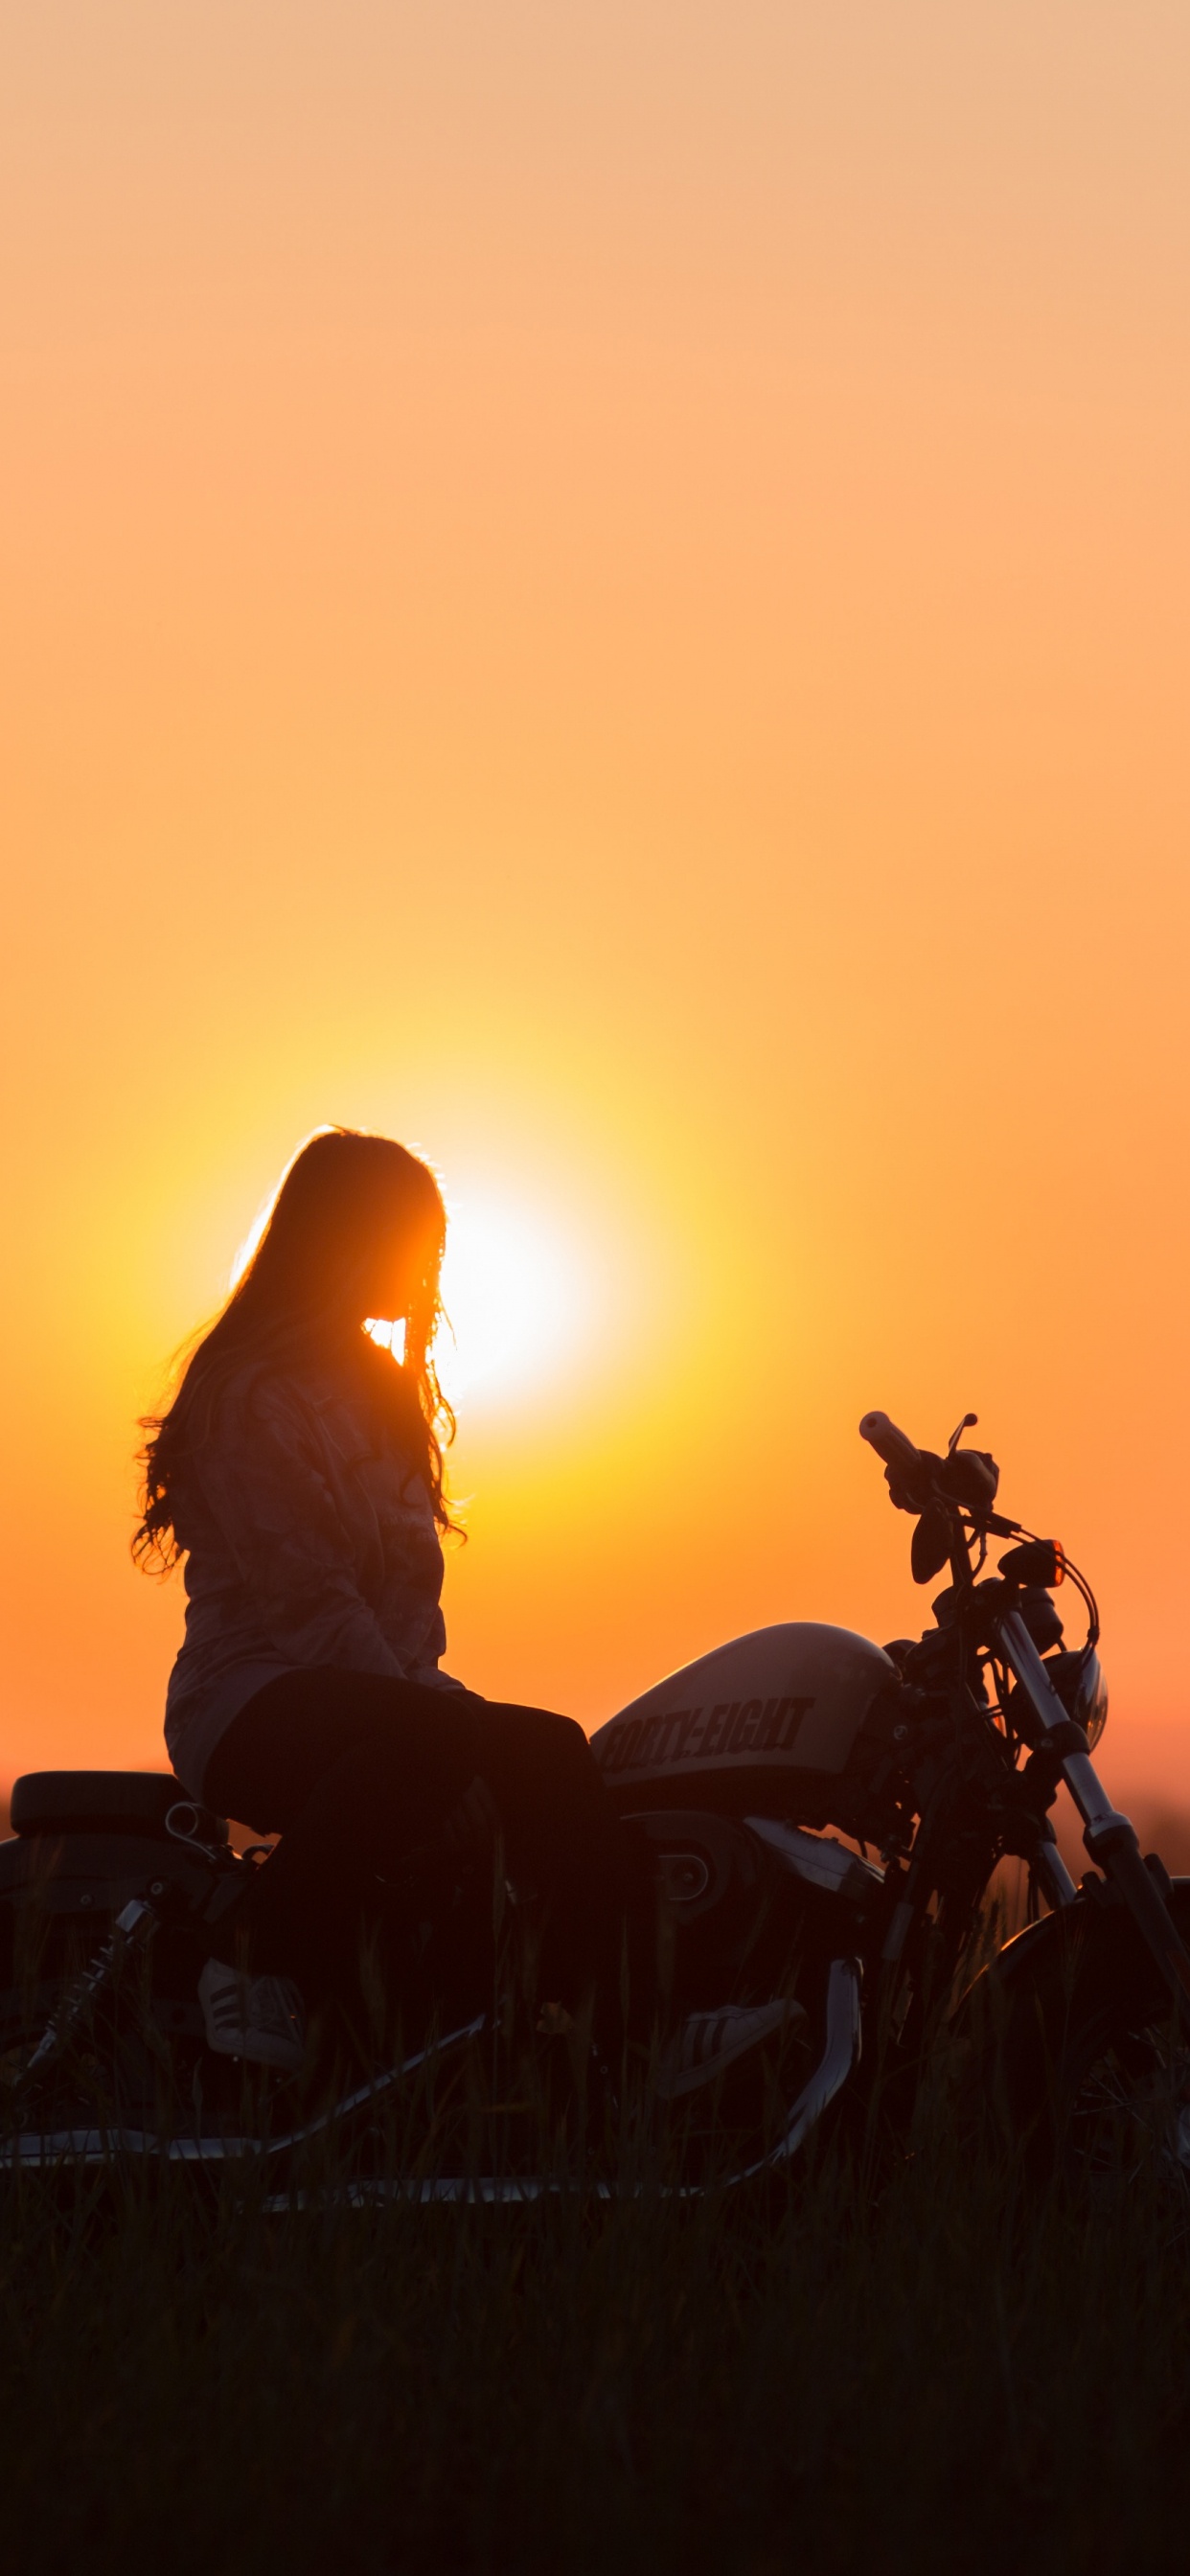 Silhouette of Man Riding Motorcycle During Sunset. Wallpaper in 1242x2688 Resolution